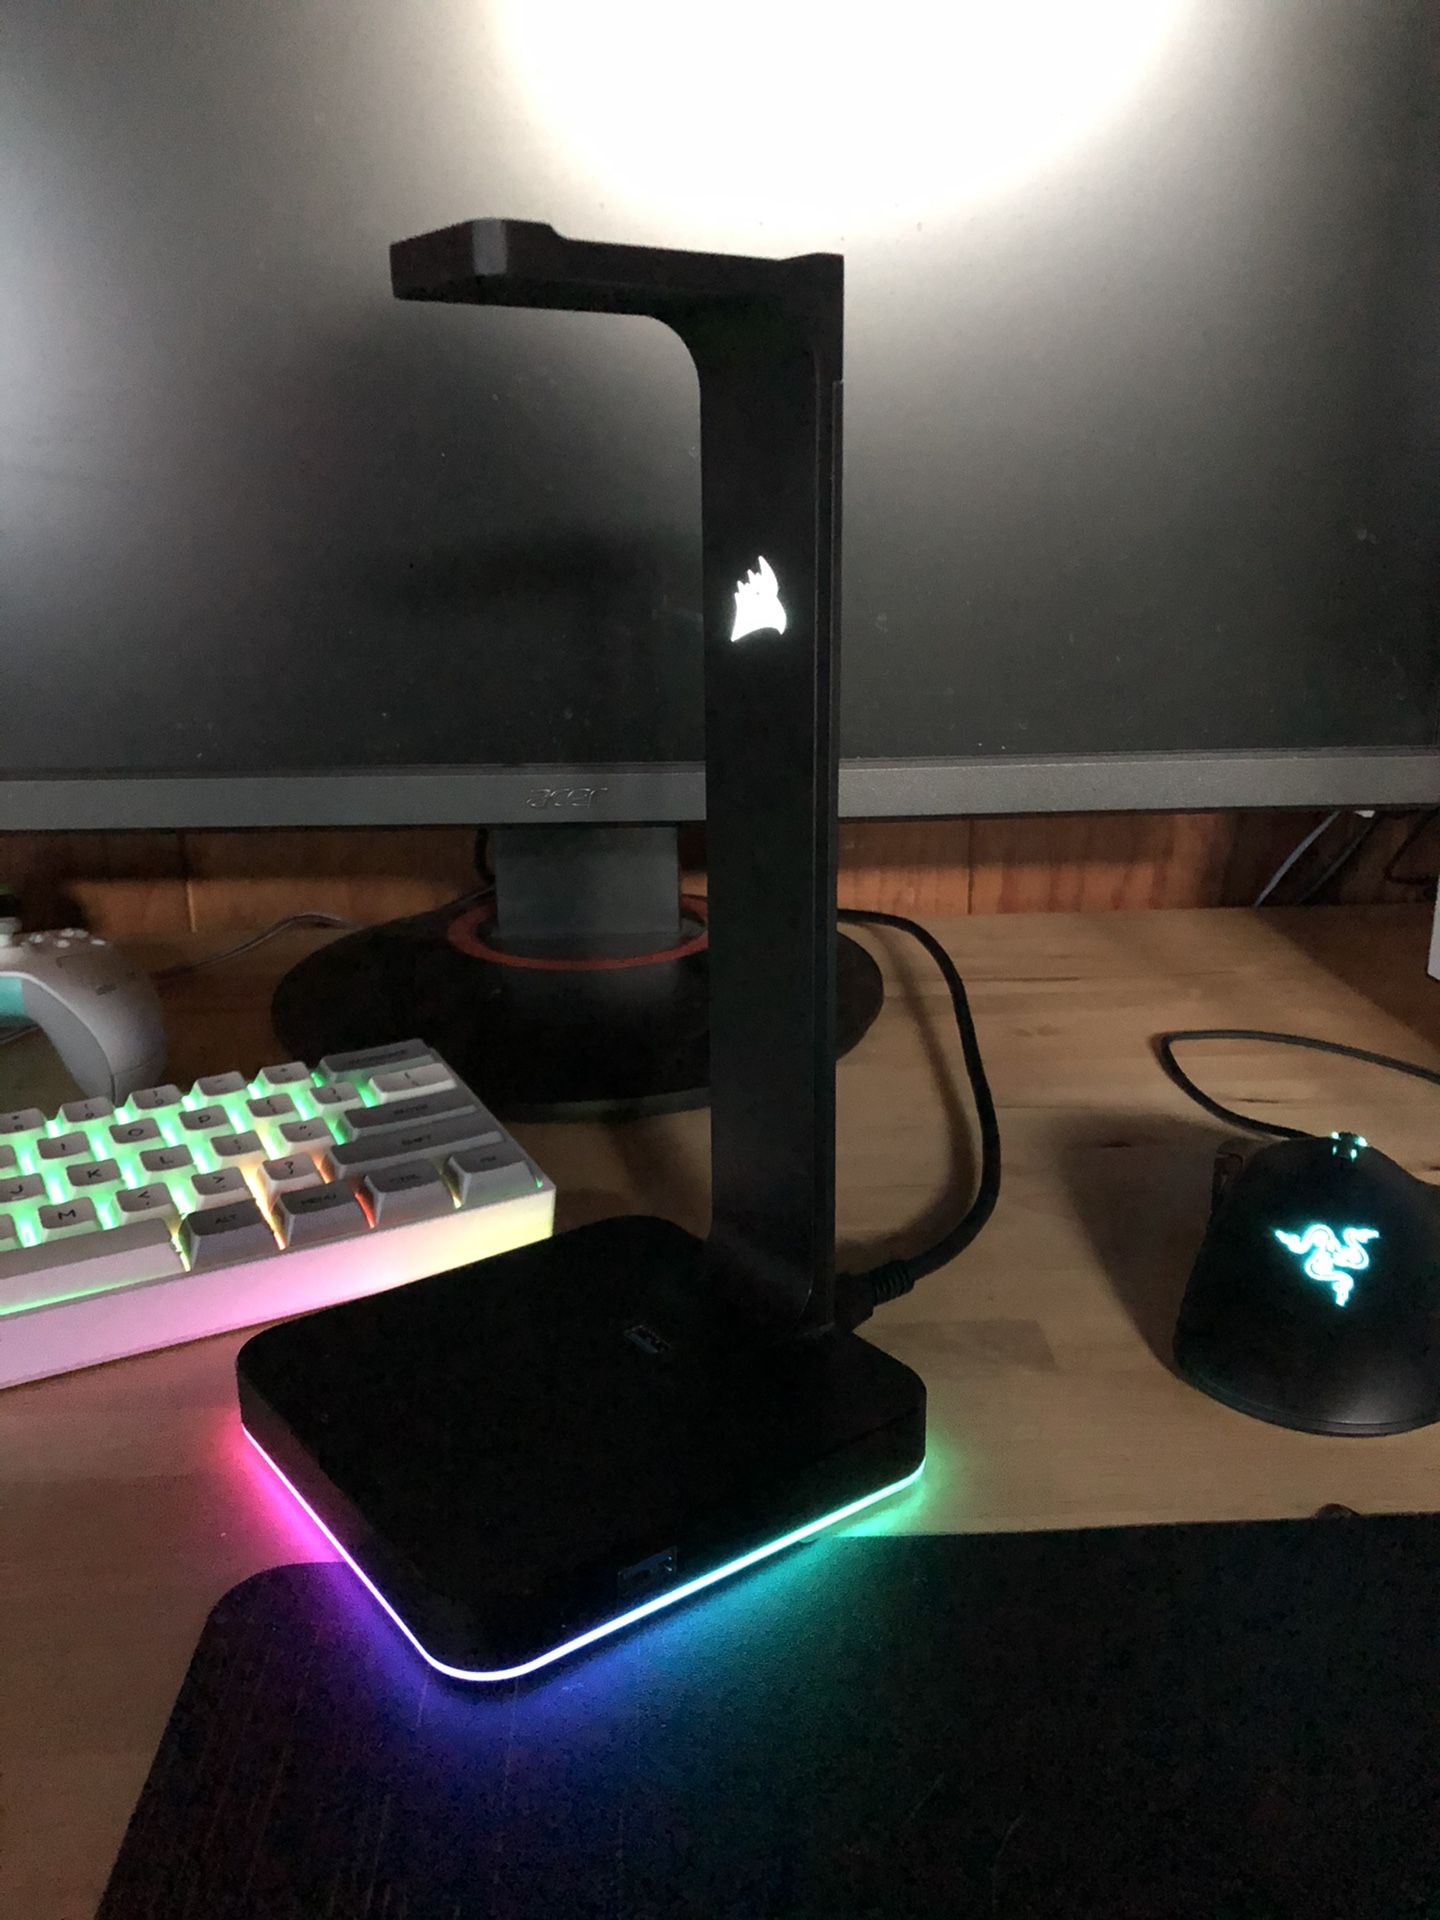 Corsair ST100 Premium headset stand with 7.1 surround sound-3.5 mm and 2xUSB 3.0. Keyboard and mouse are not for sale!